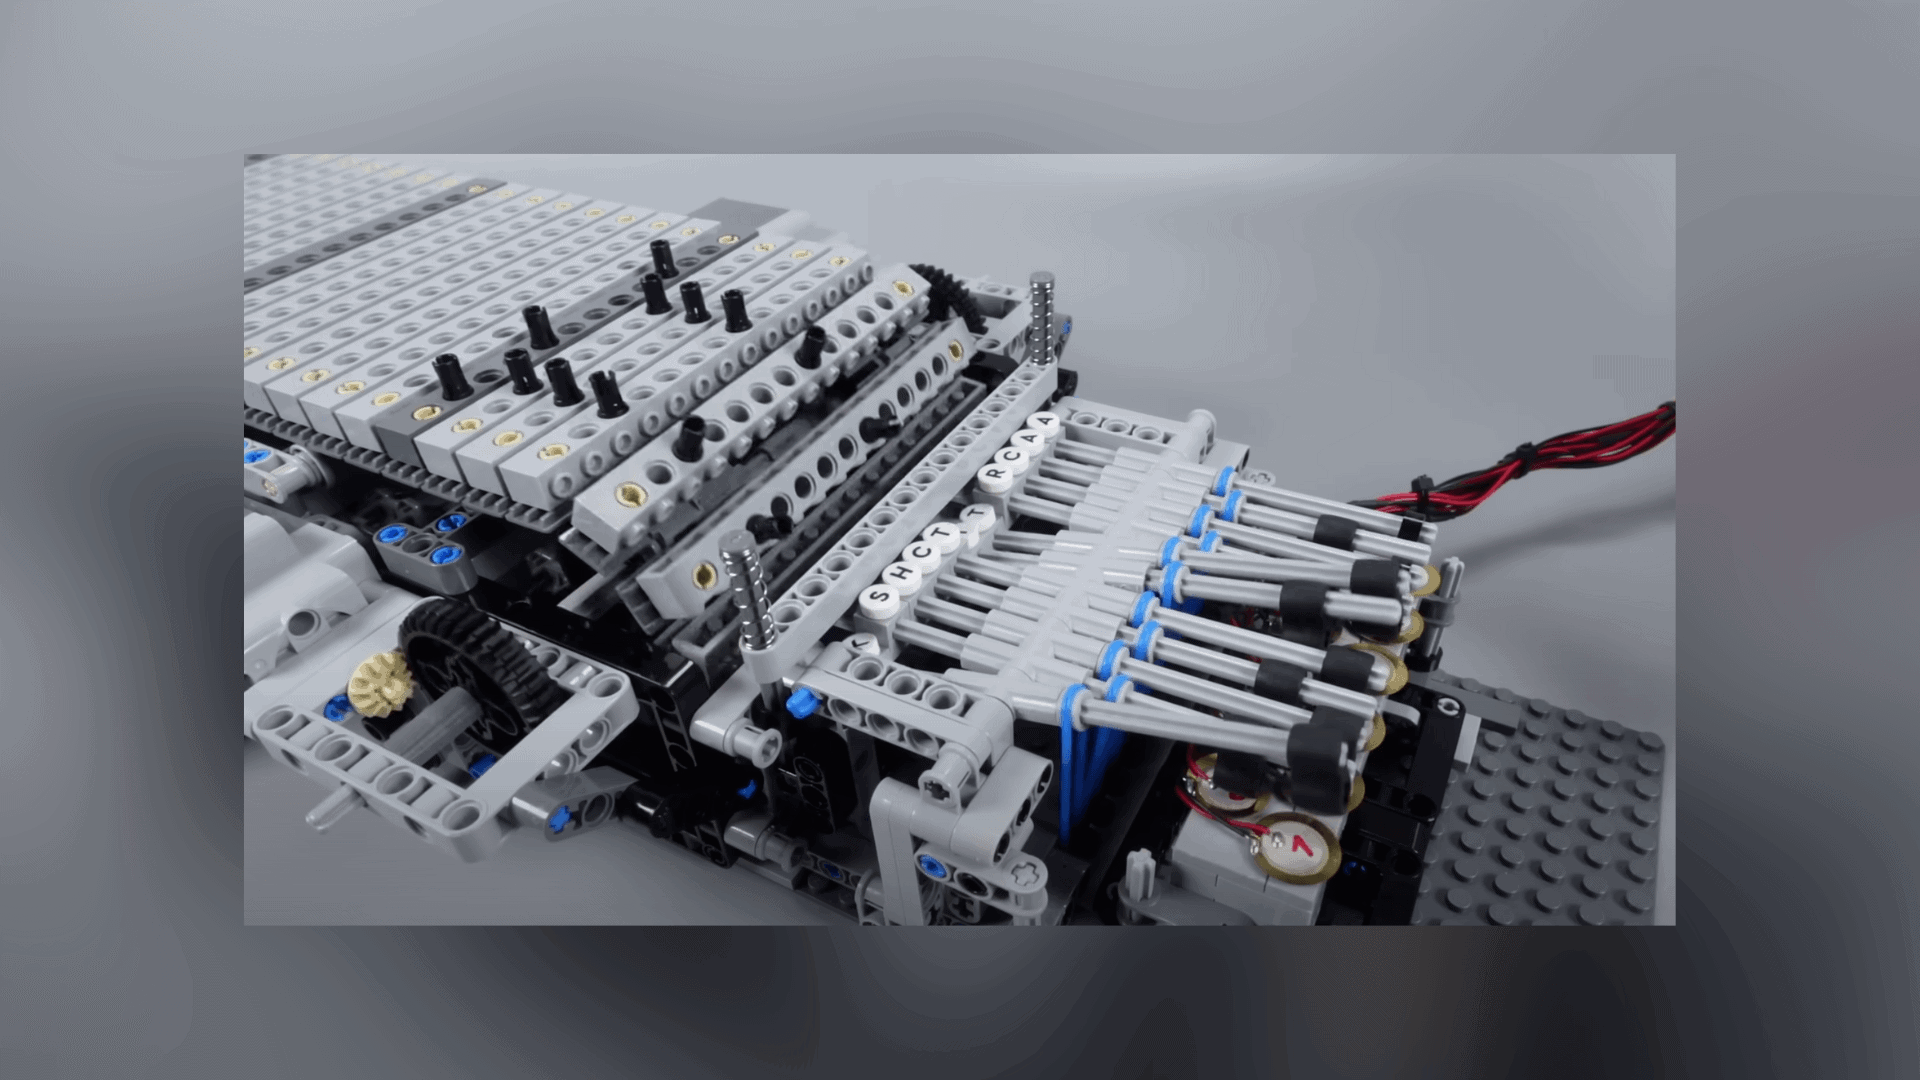 YouTuber builds Drum Machine out of Lego